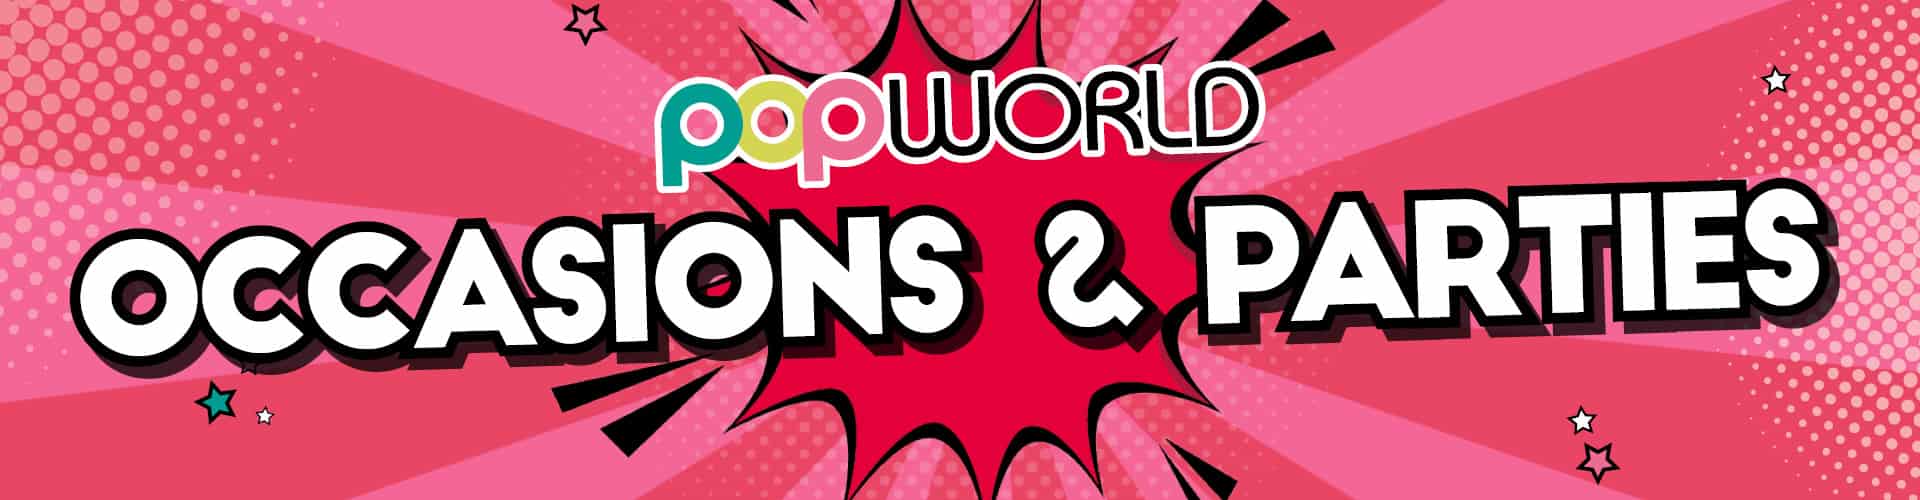 Occasions and Parties at Popworld Milton Keynes